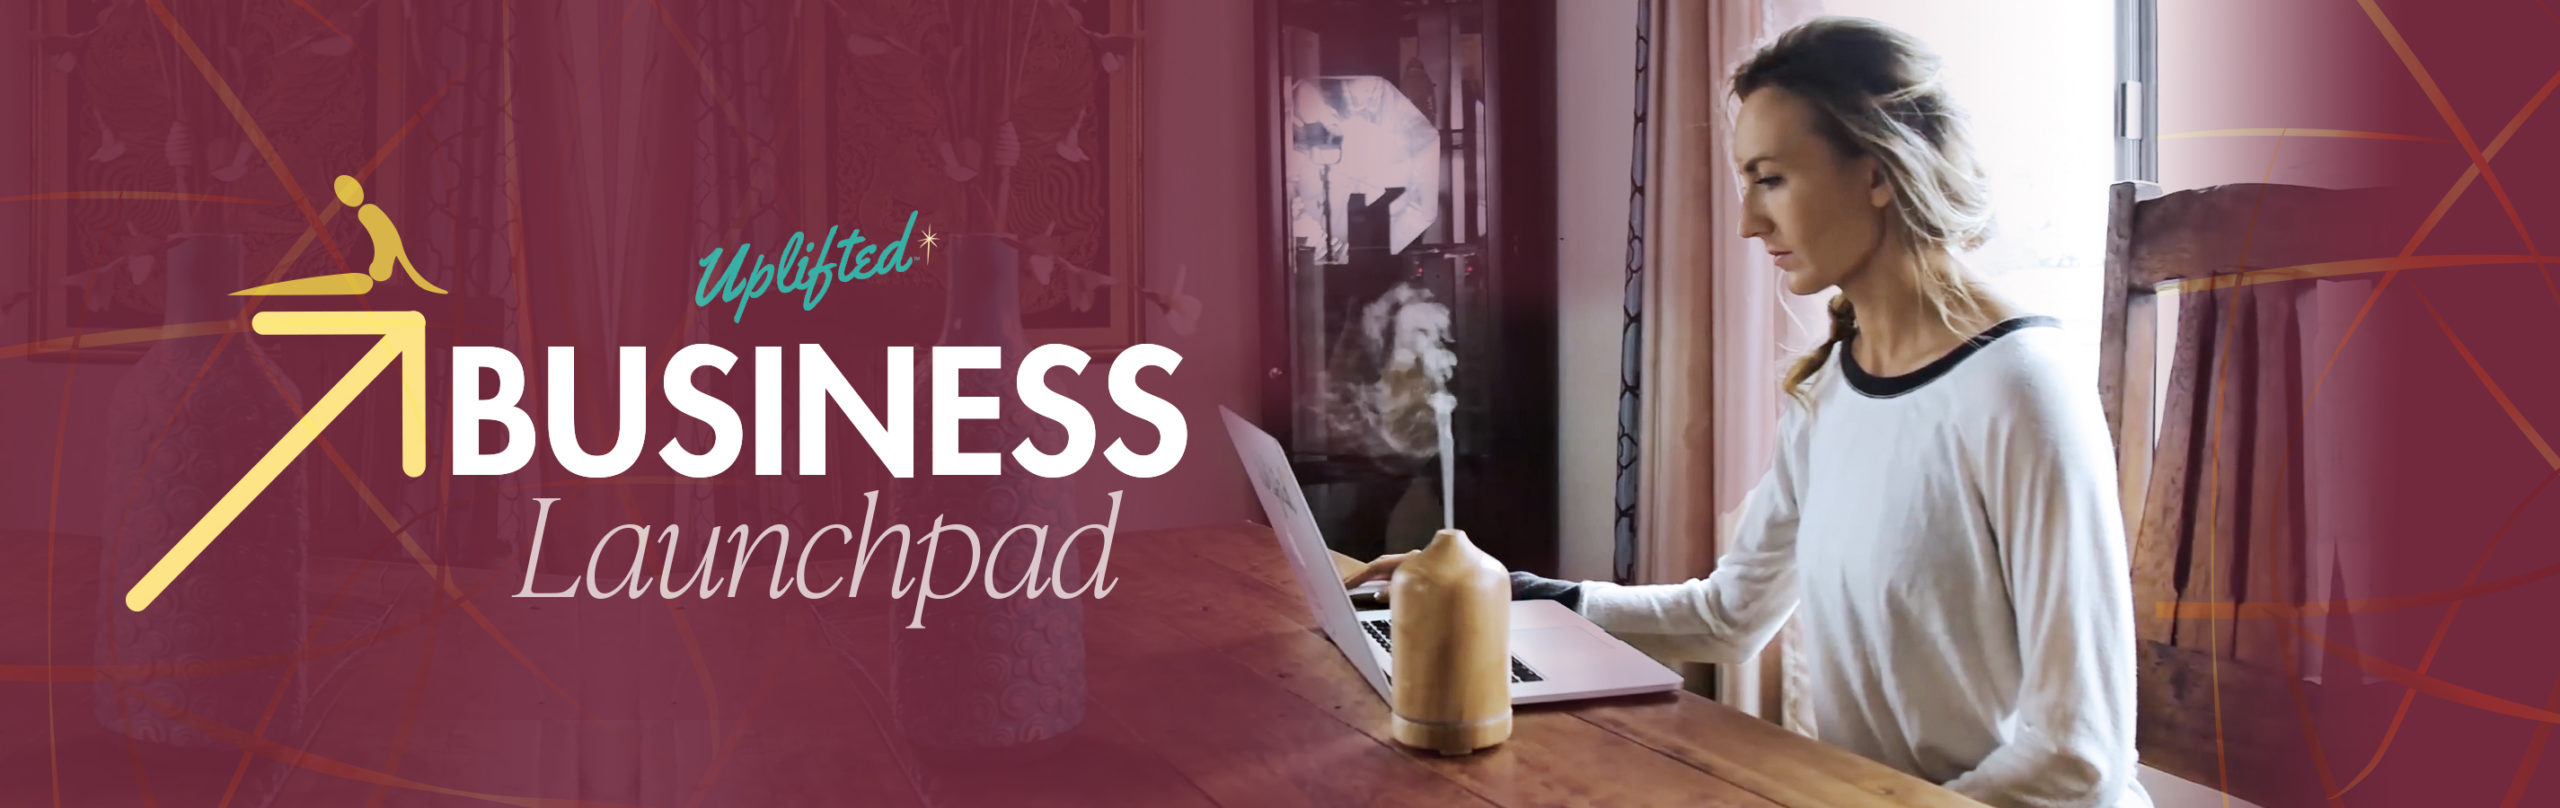 yoga business launchpad banner for uplifted yoga